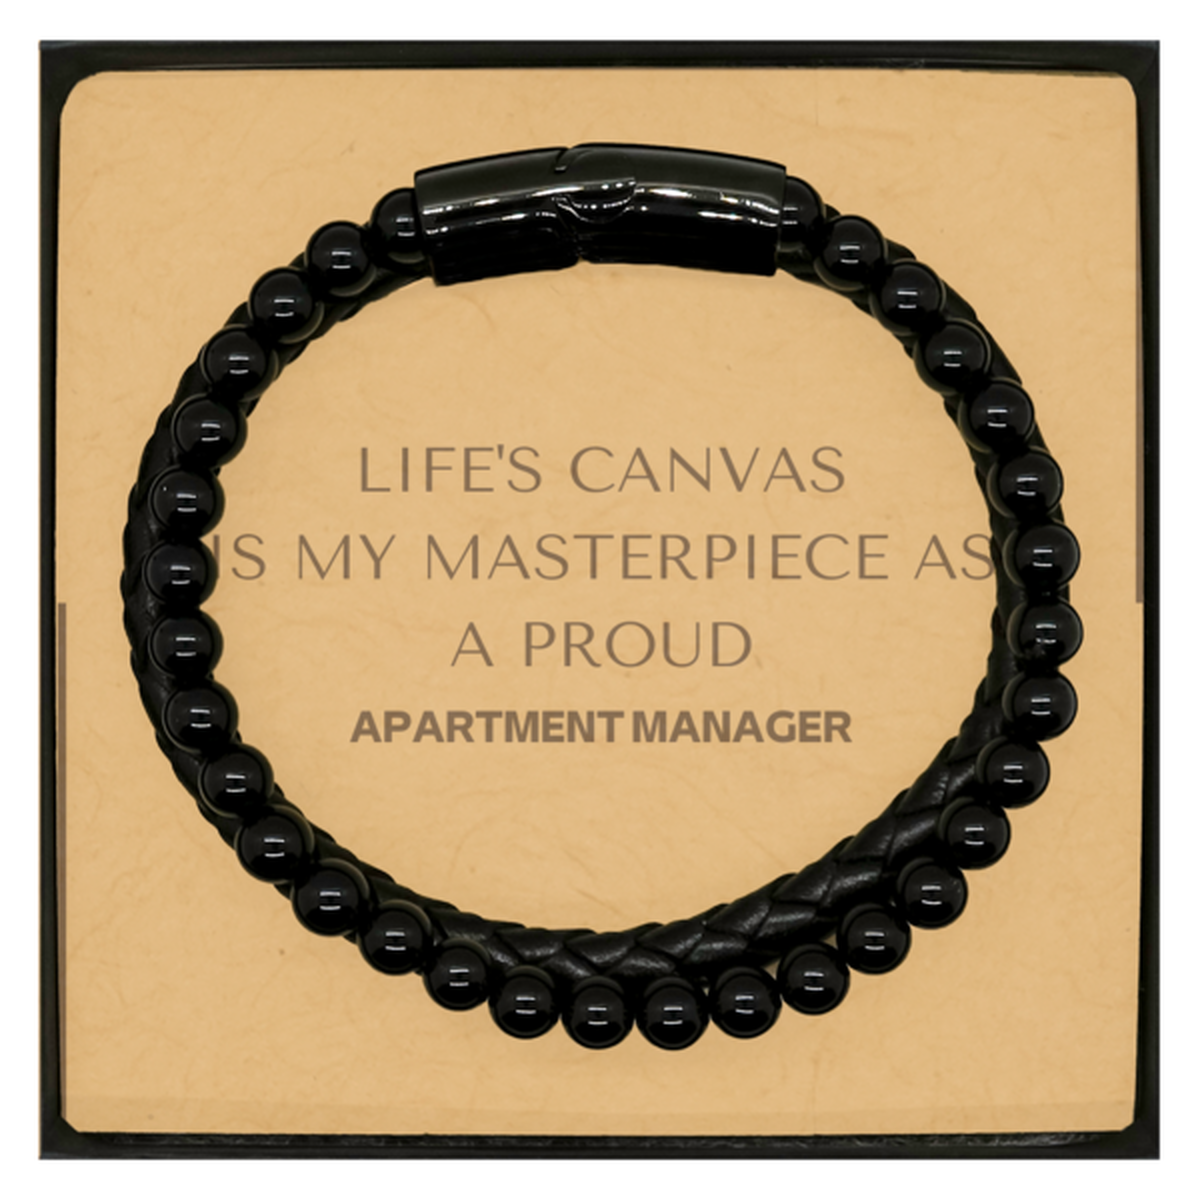 Proud Apartment Manager Gifts, Life's canvas is my masterpiece, Epic Birthday Christmas Unique Stone Leather Bracelets For Apartment Manager, Coworkers, Men, Women, Friends